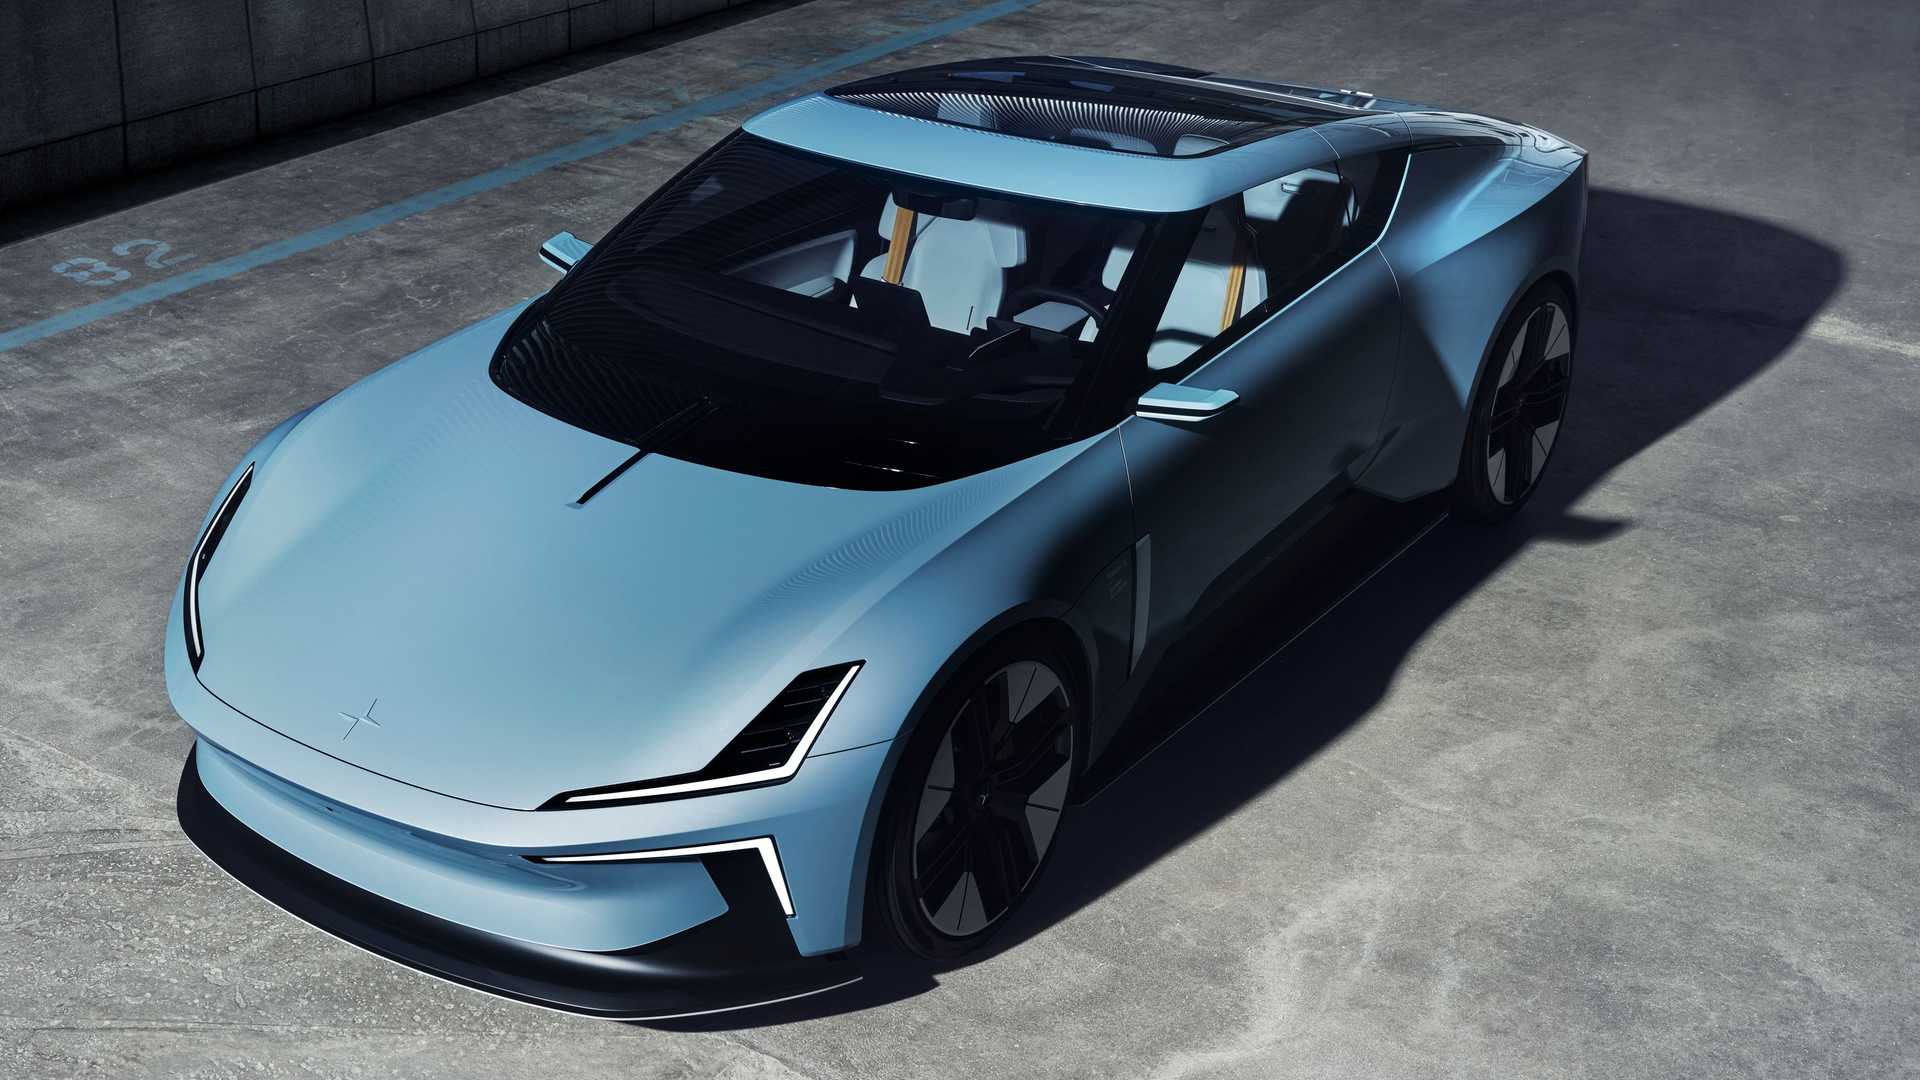 The Polestar O2 is a Swedish cabriolet with a built-in drone, 800-V propulsion system, and two electric motors with 900 HP